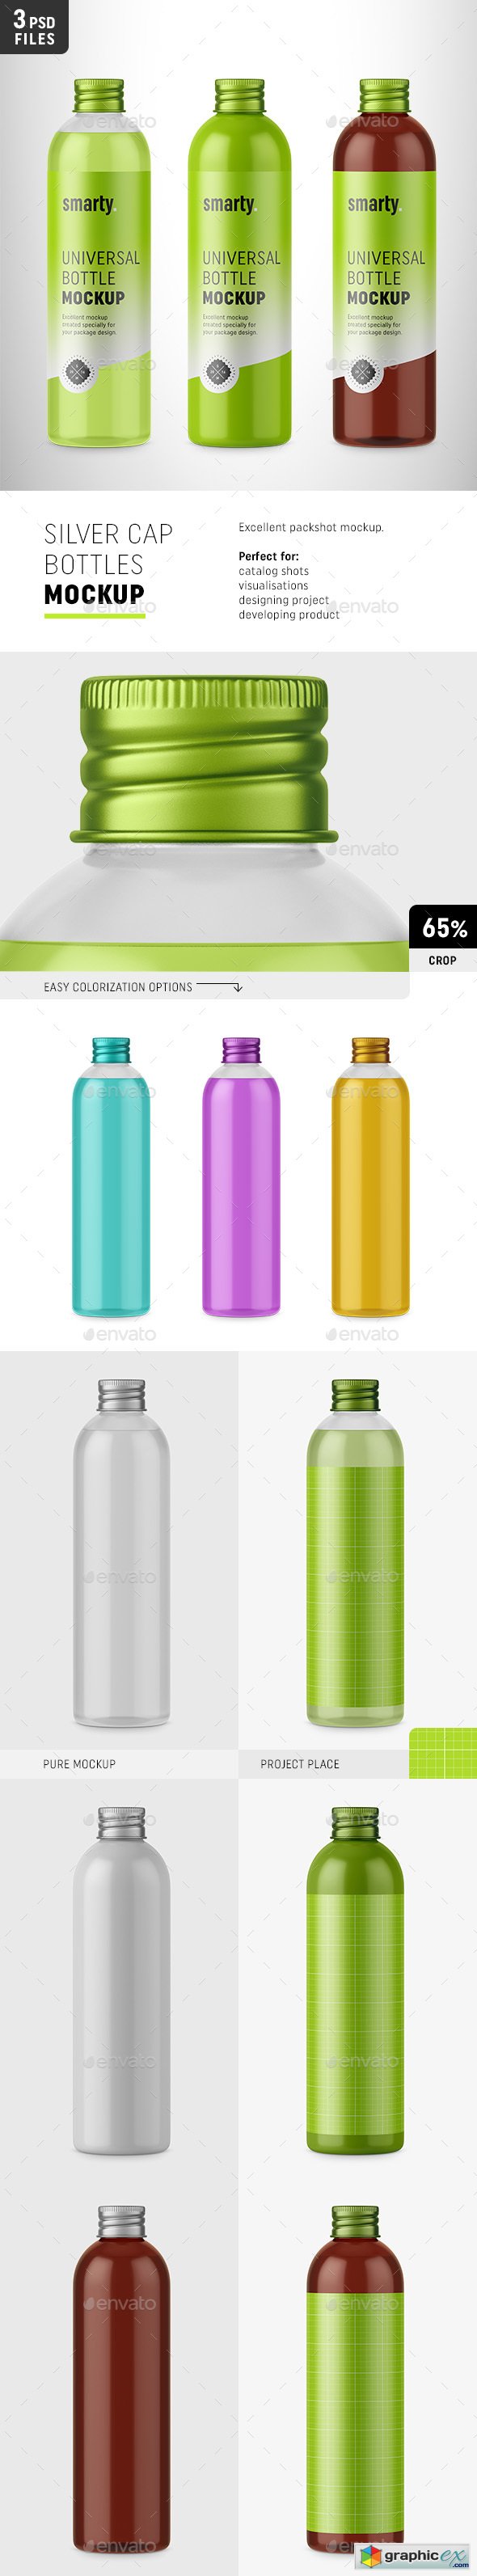 Bottles with Silver Cap Mockup